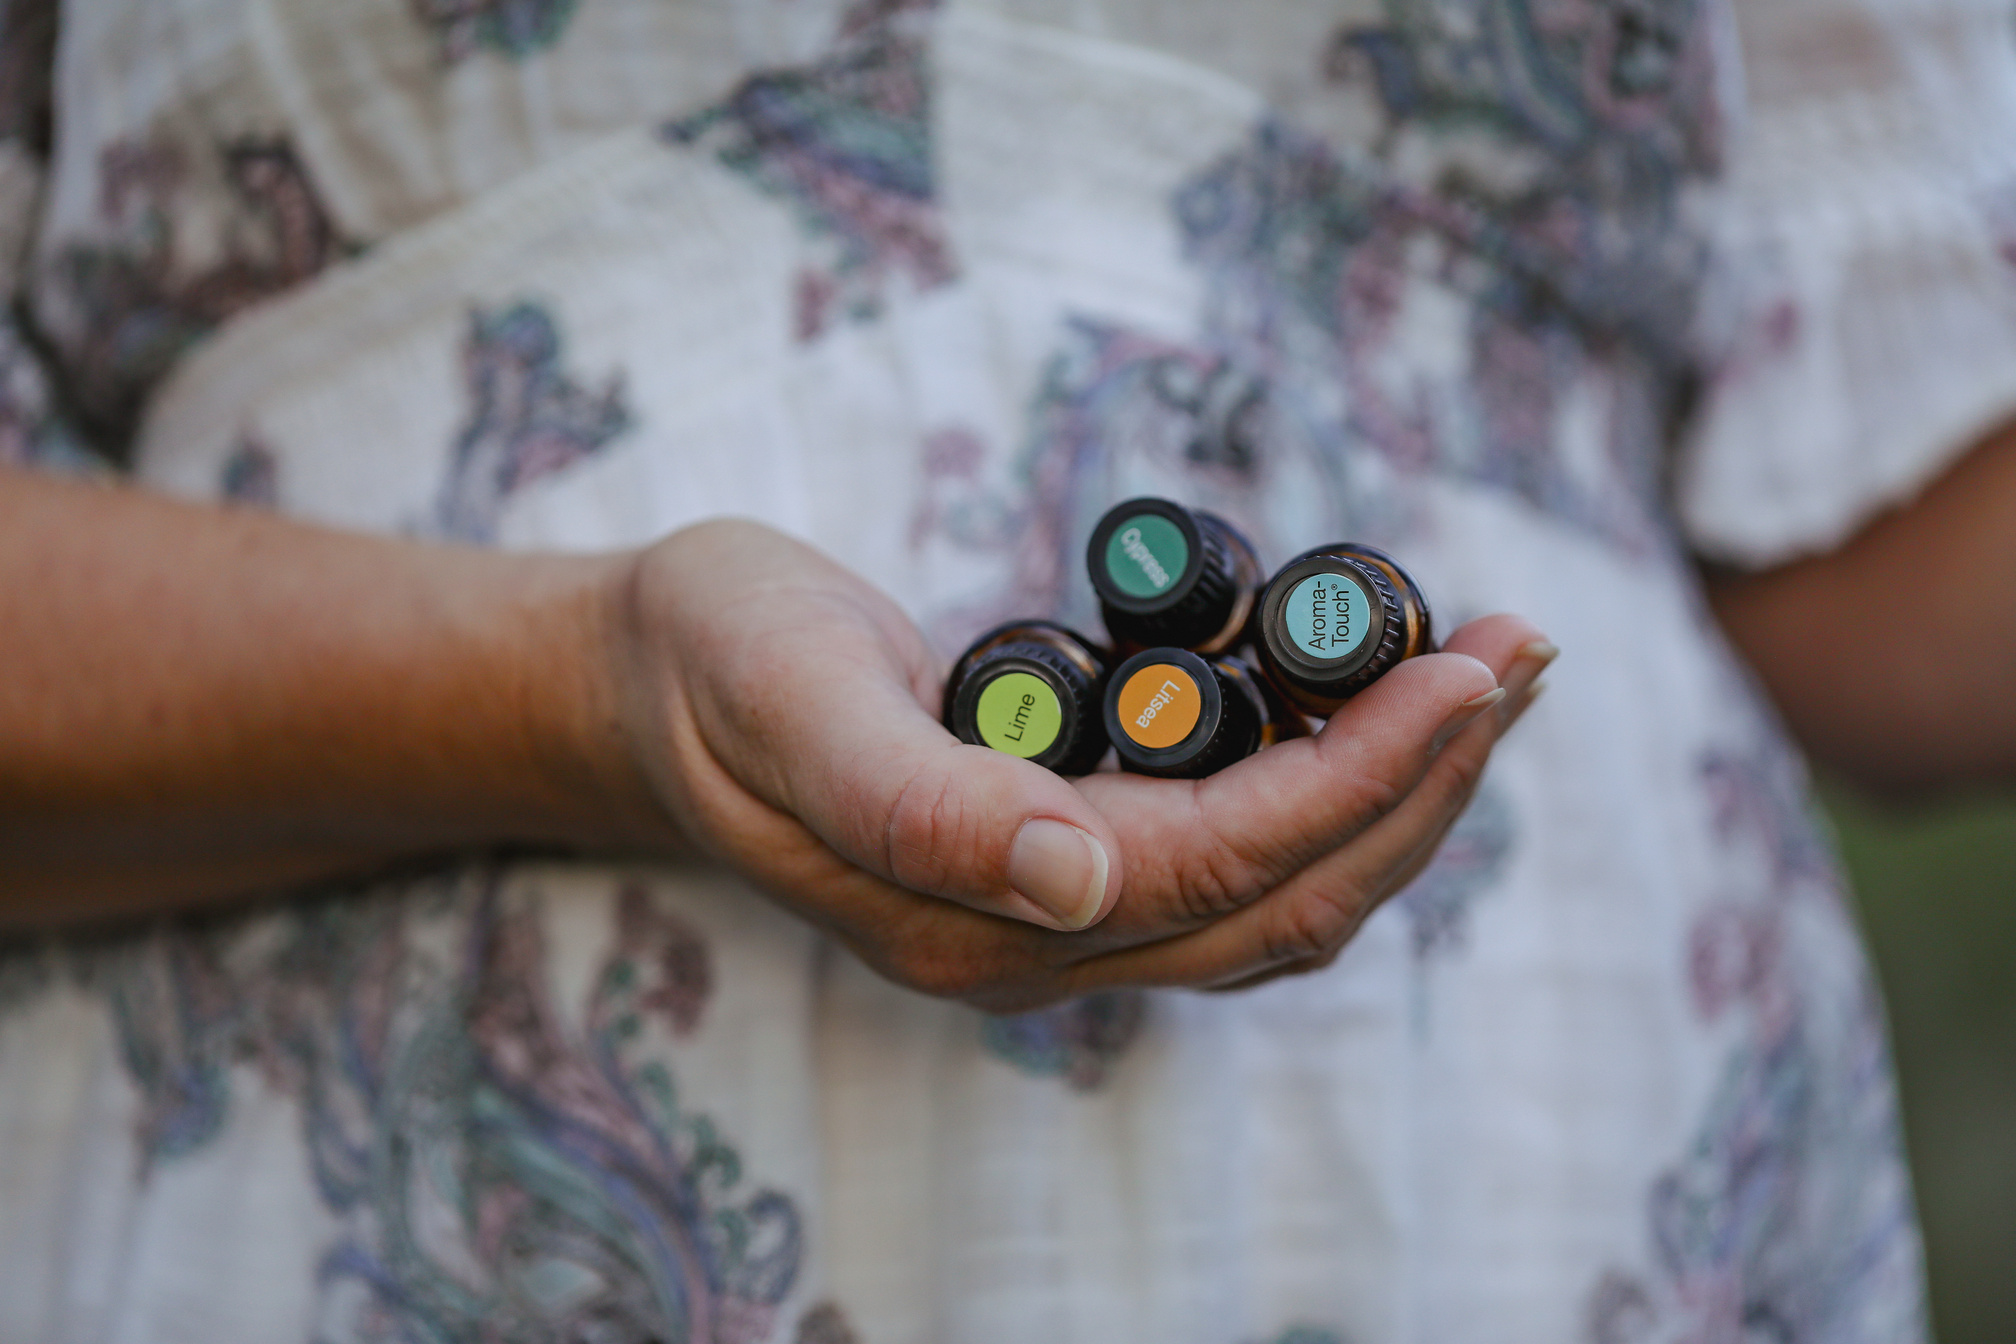 Firefly NSW Australia - 20 April 2022: Woman in Forest Holding Bundle of Doterra Essential Oils